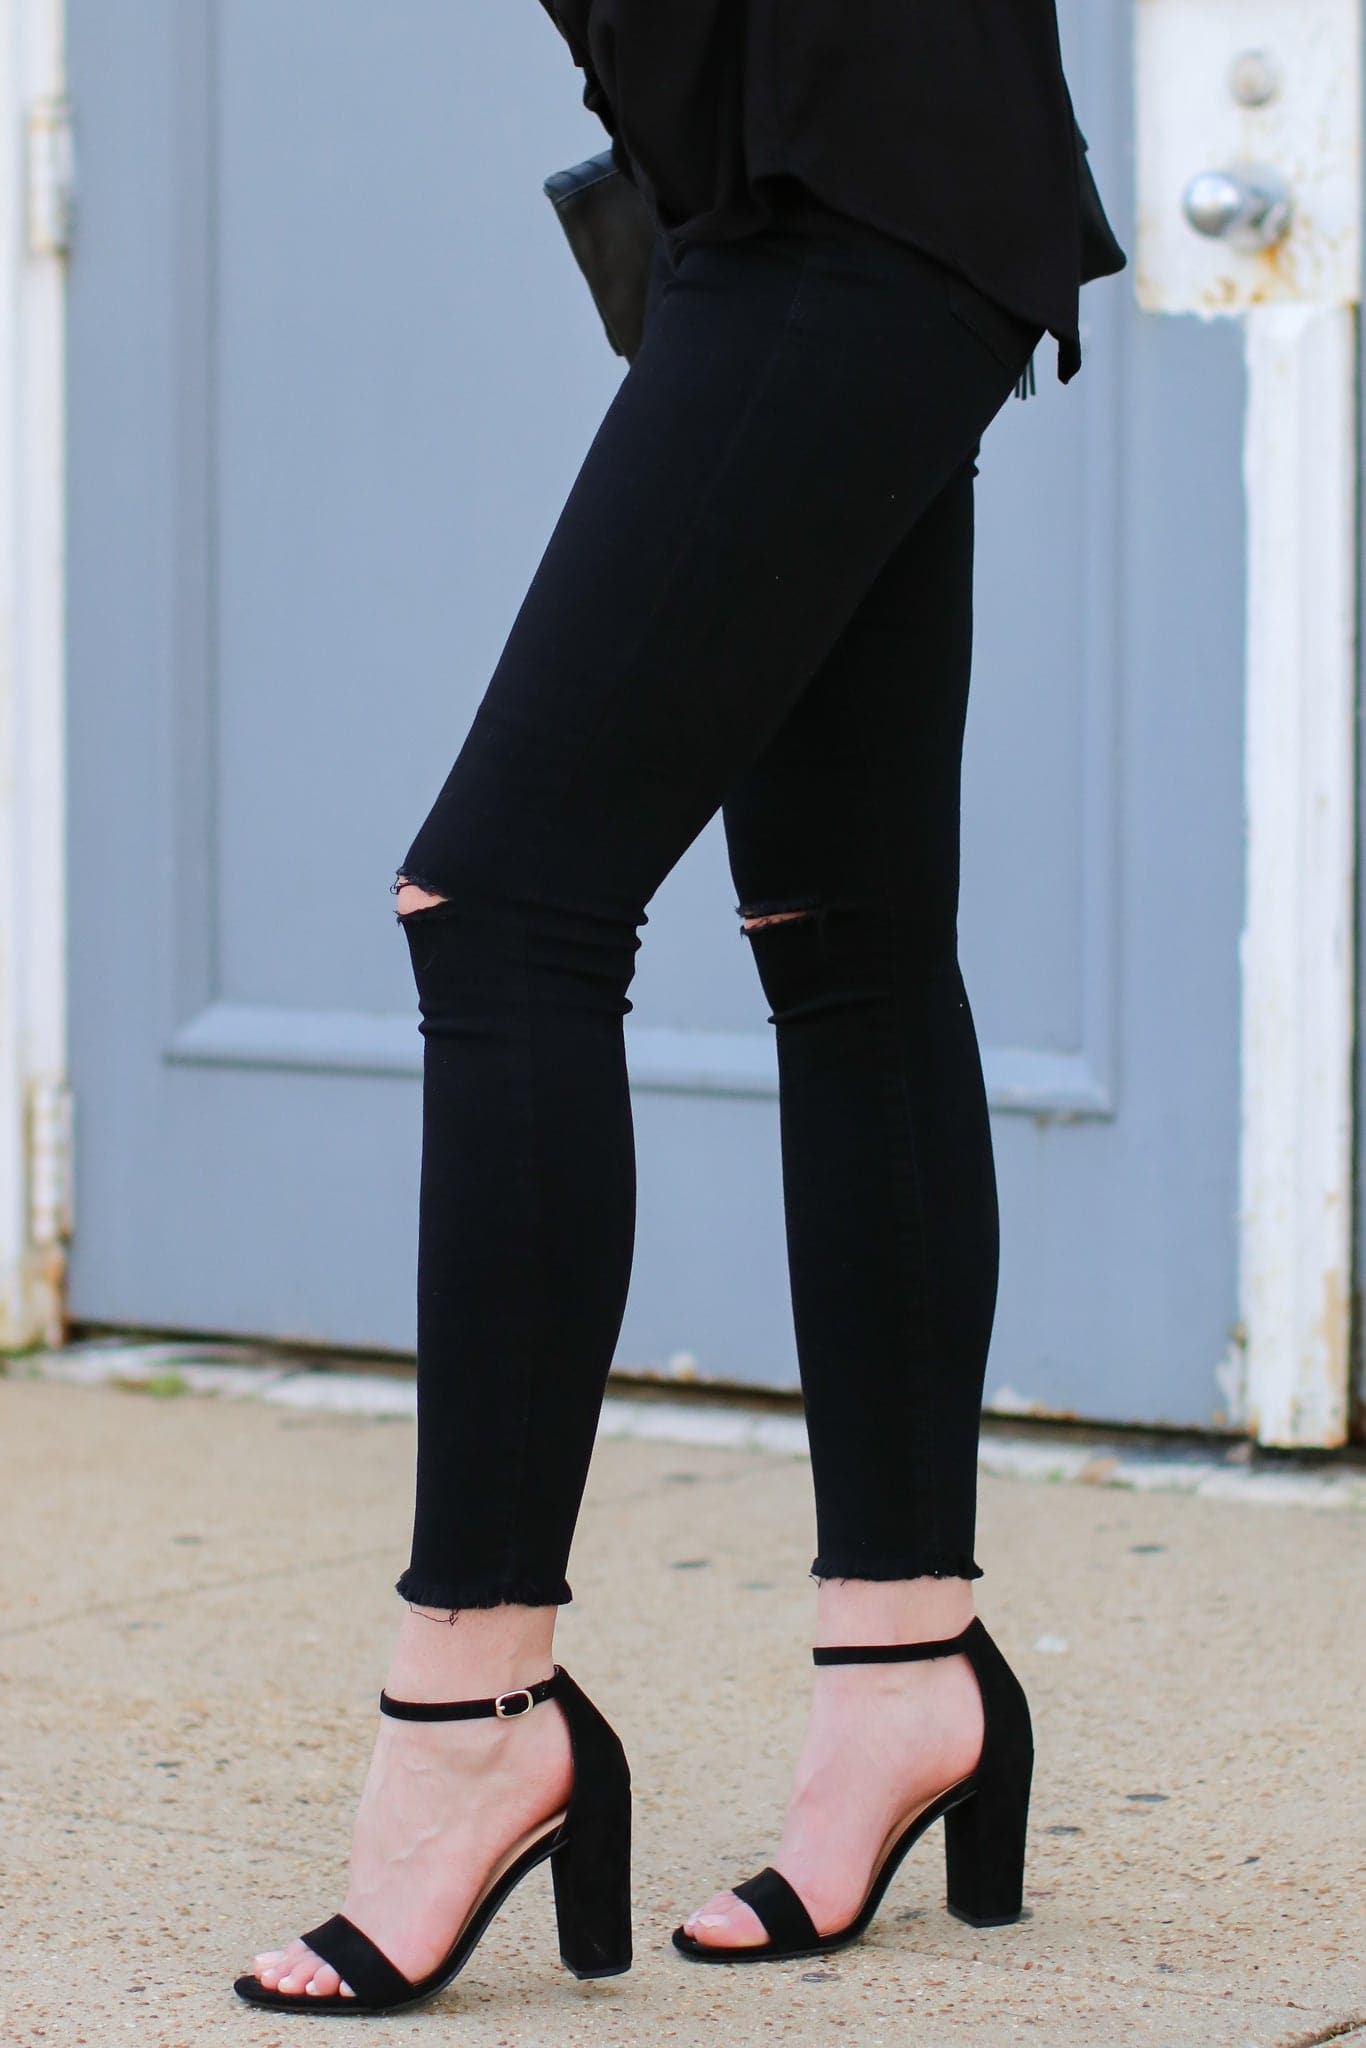  Berea Knee Slit Skinny Jeans - FINAL SALE - Madison and Mallory